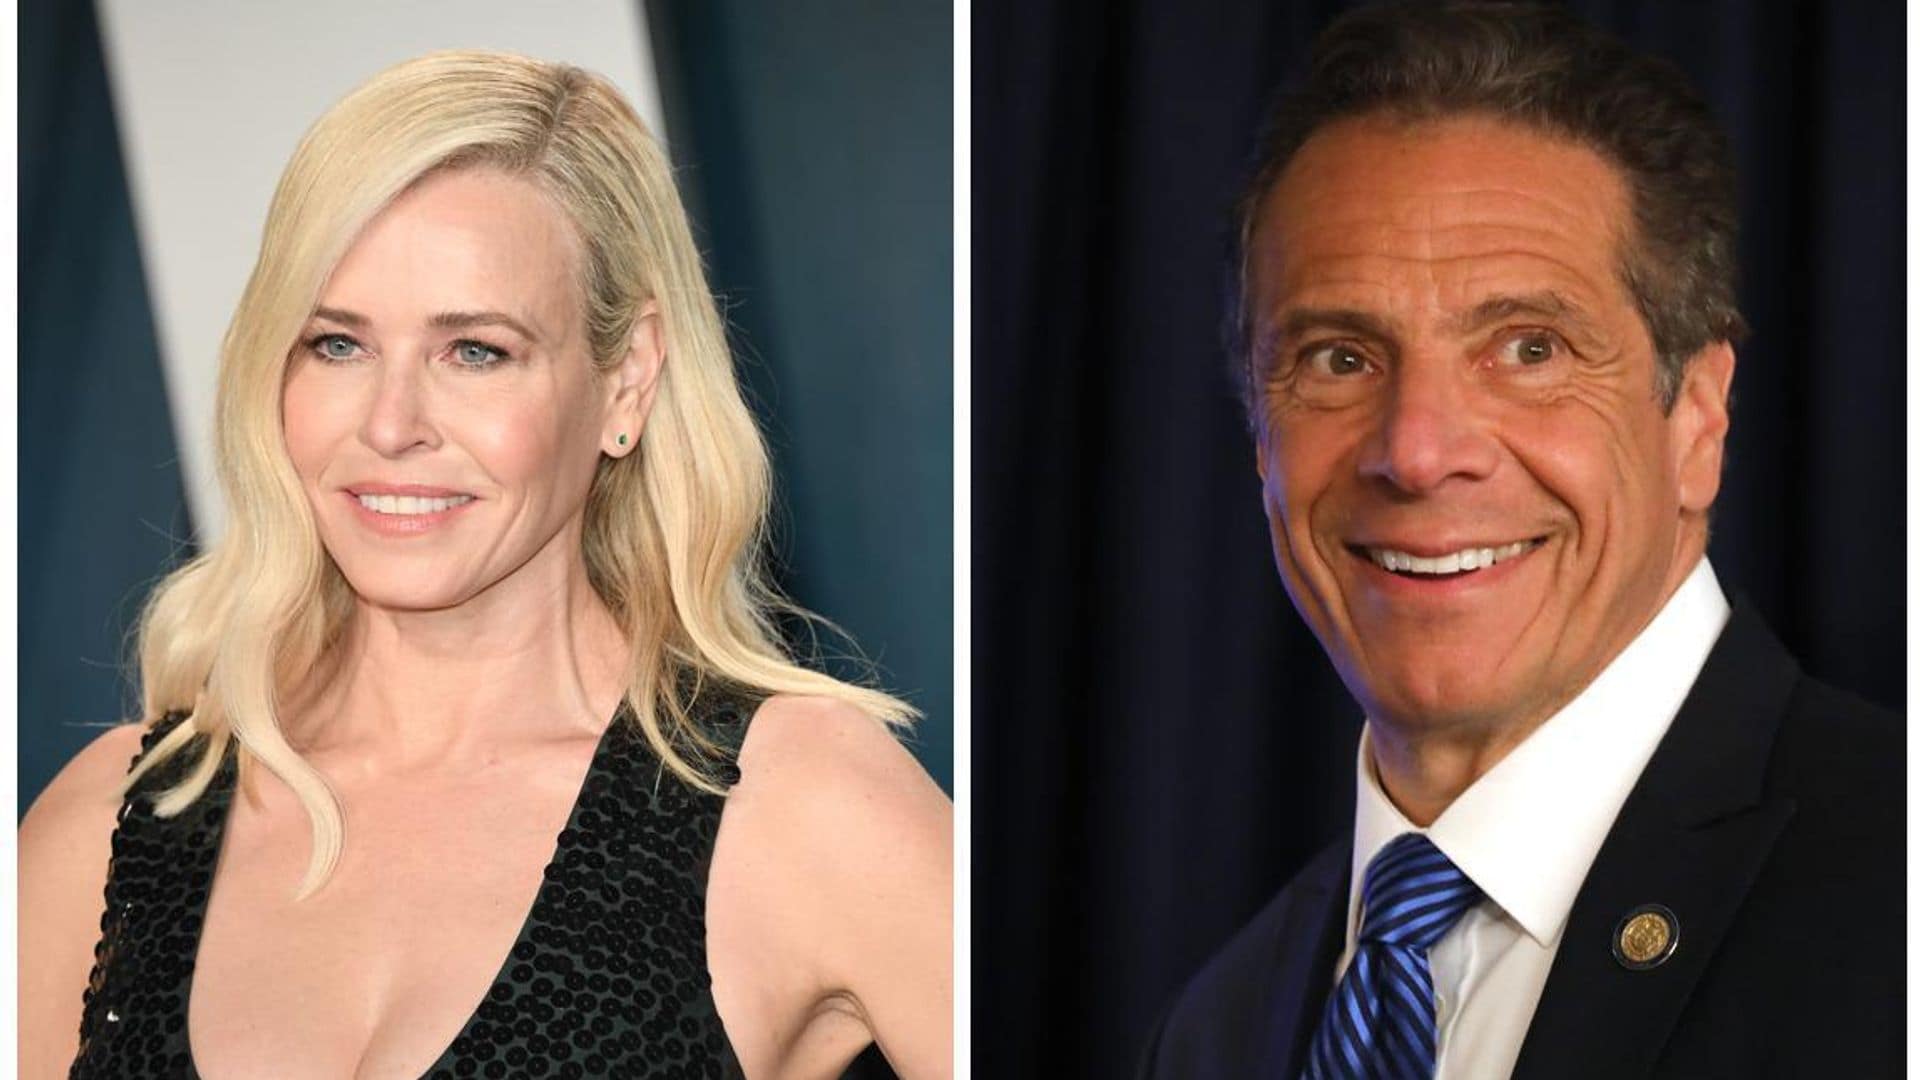 Governor Cuomo ghosted Chelsea Handler after she asked him out on a date